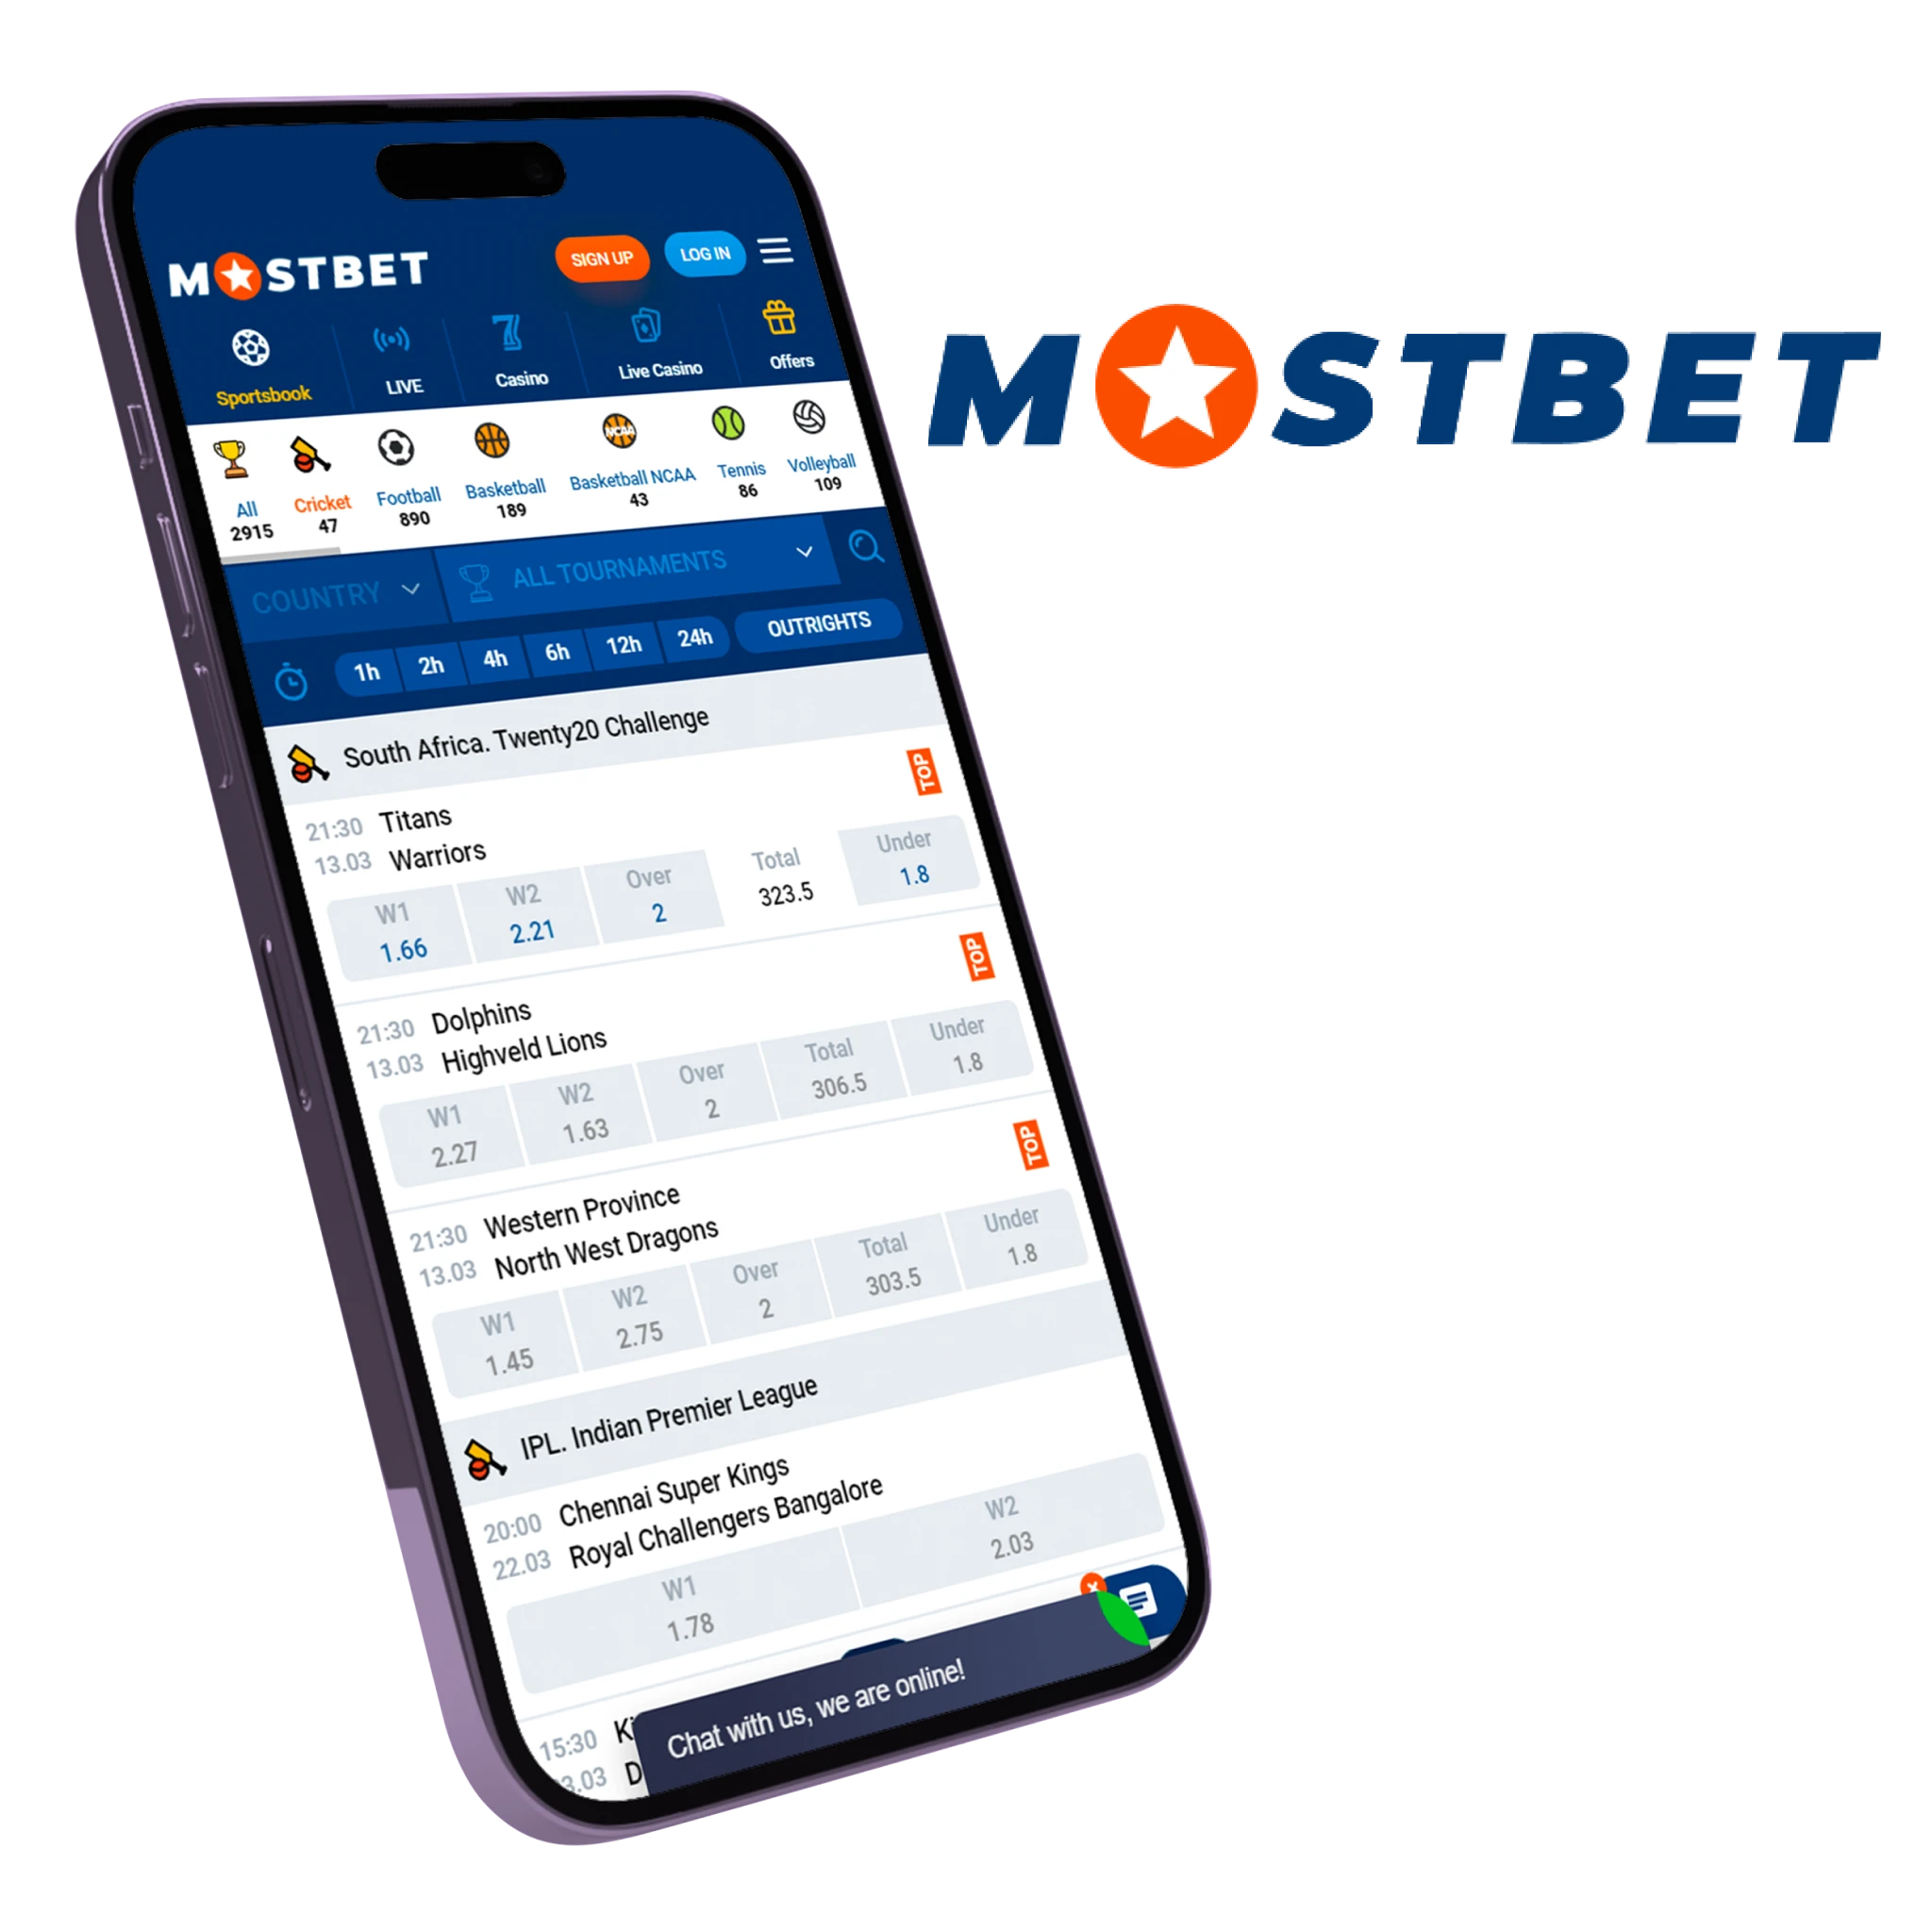 The Mostbet app provides a convenient and an accessible platform for betting fans.